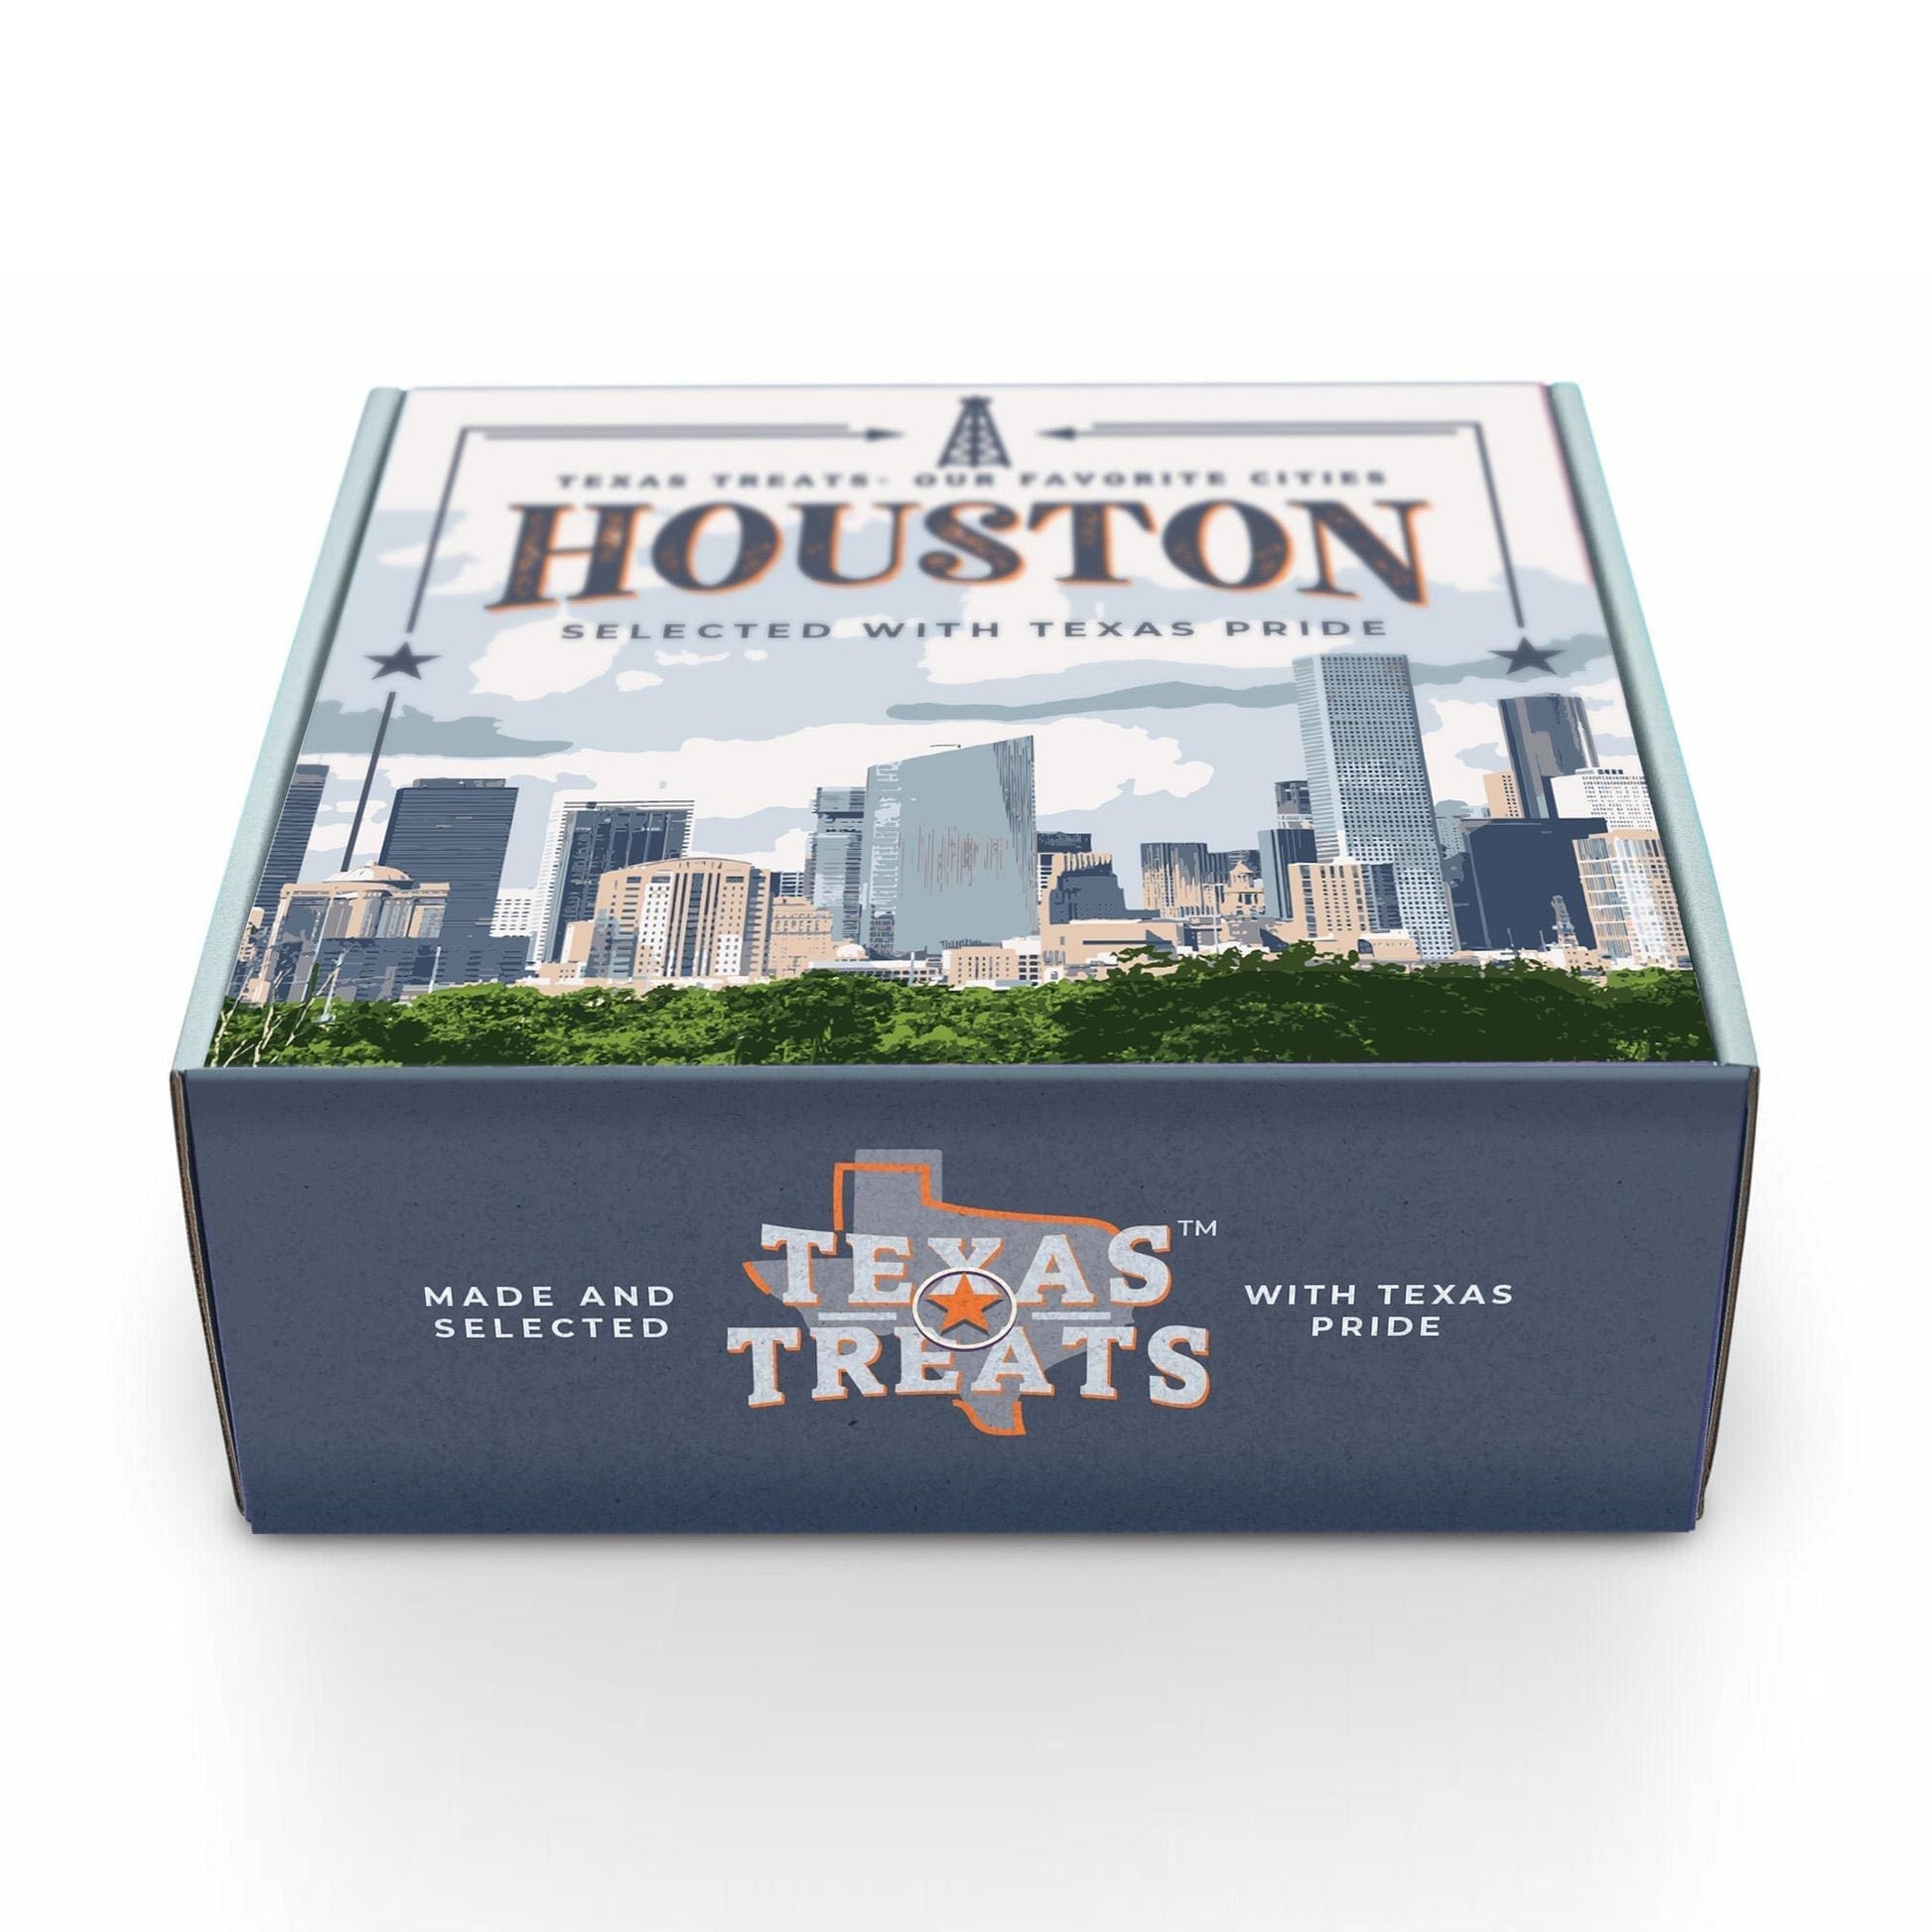 View of Texas Treats' Houston gift box, viewed from the top.